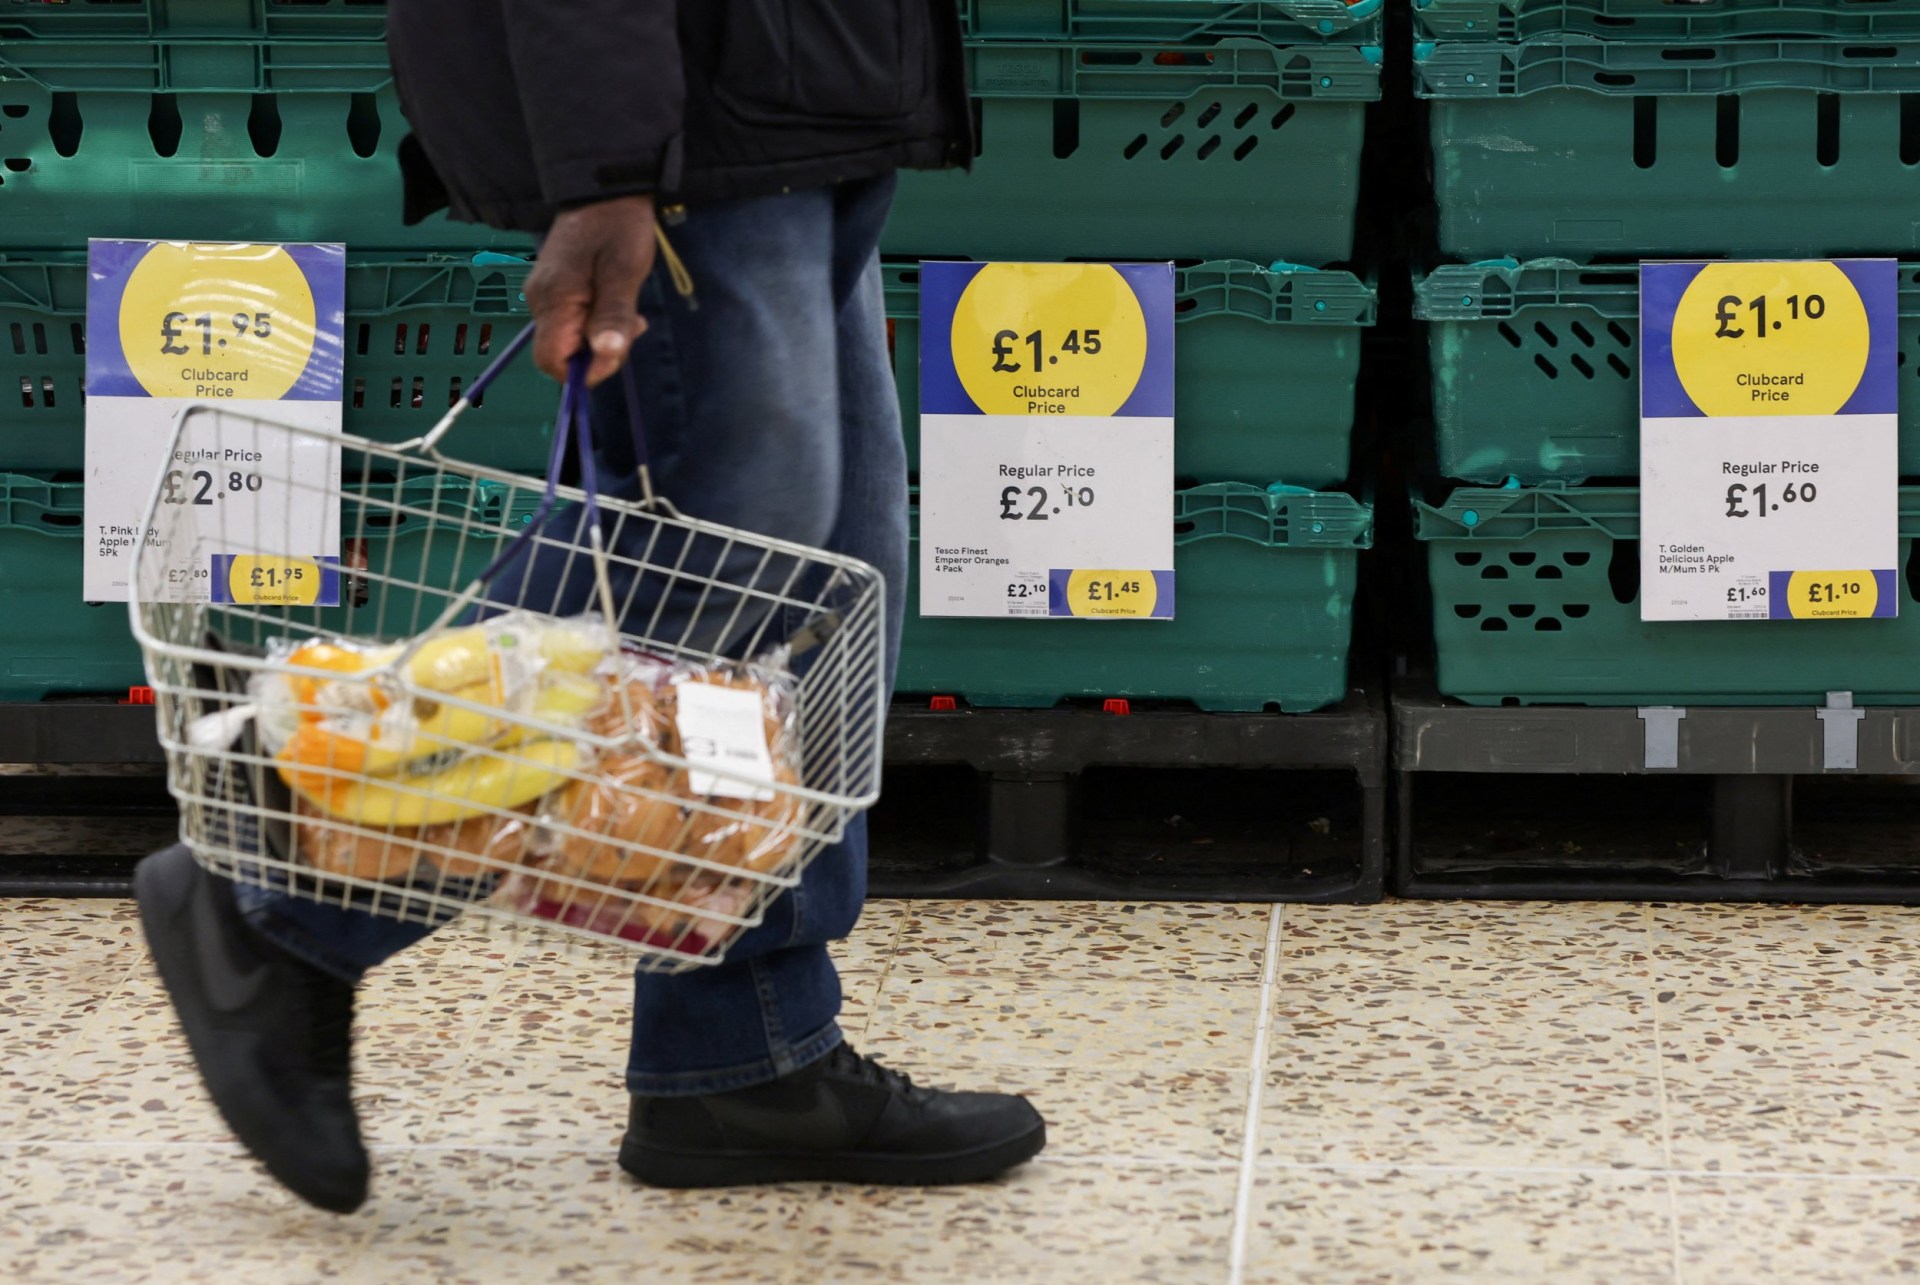 tesco issues urgent recall of everyday item over contamination fears